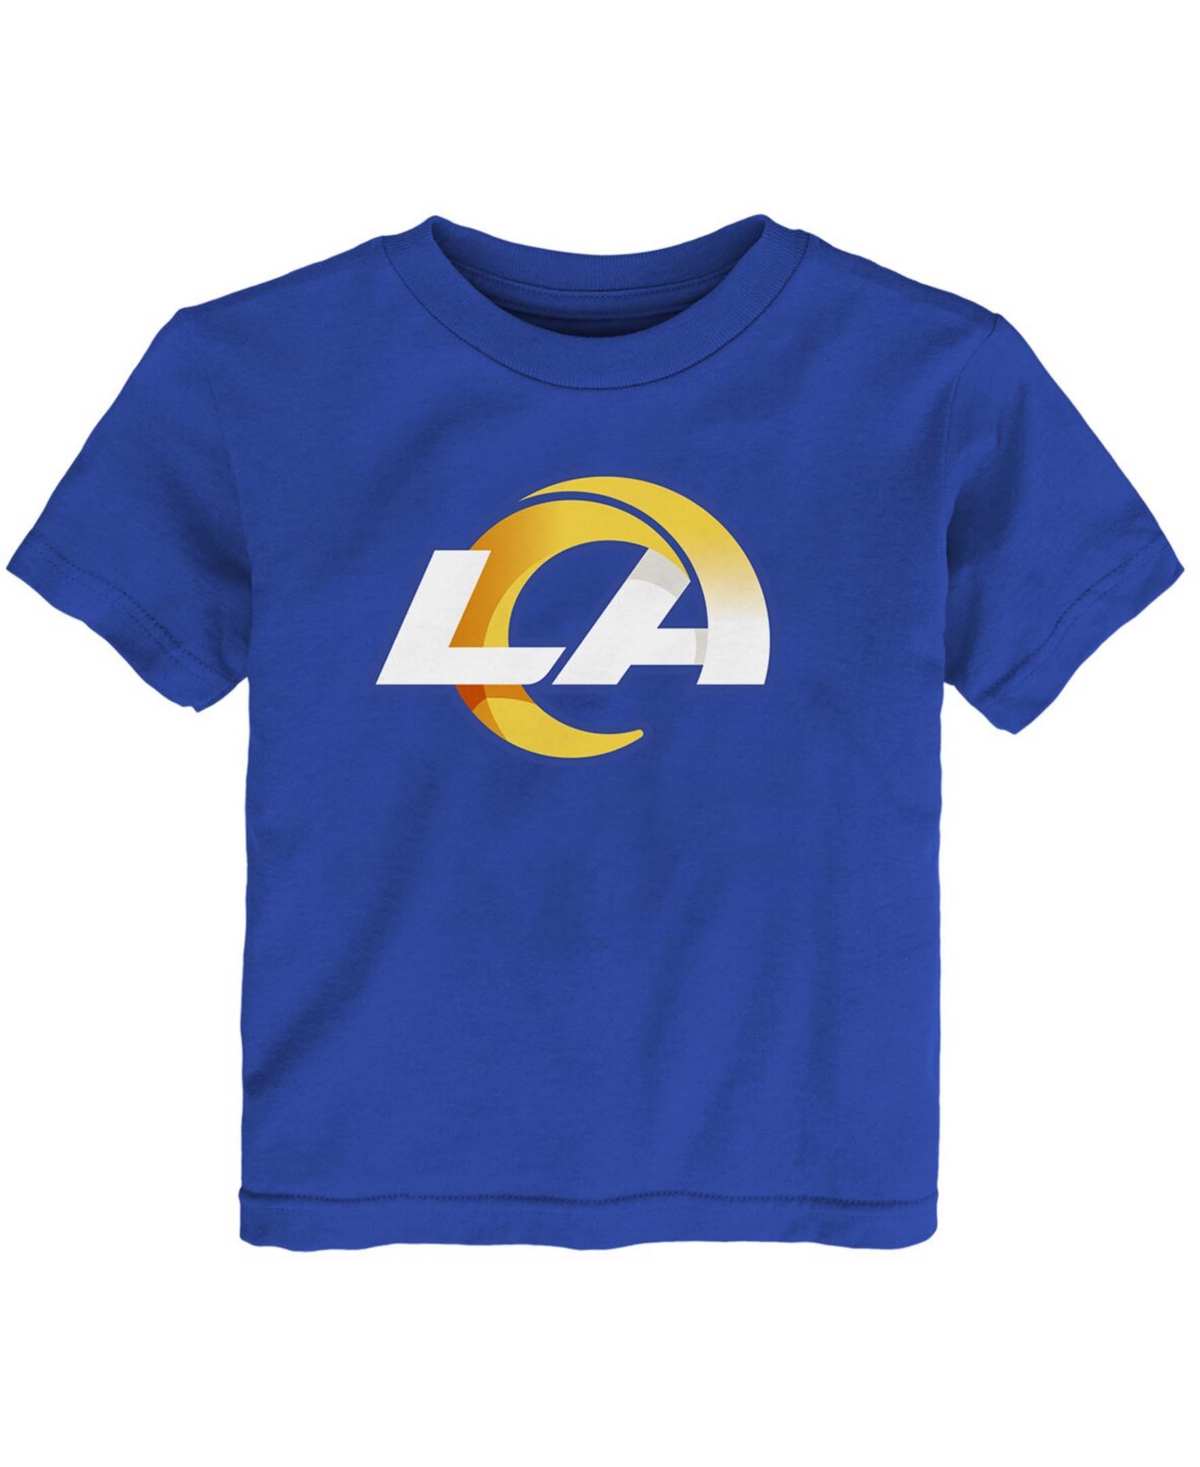 Outerstuff Babies' Toddler Boys And Girls Royal Los Angeles Rams Logo T-shirt